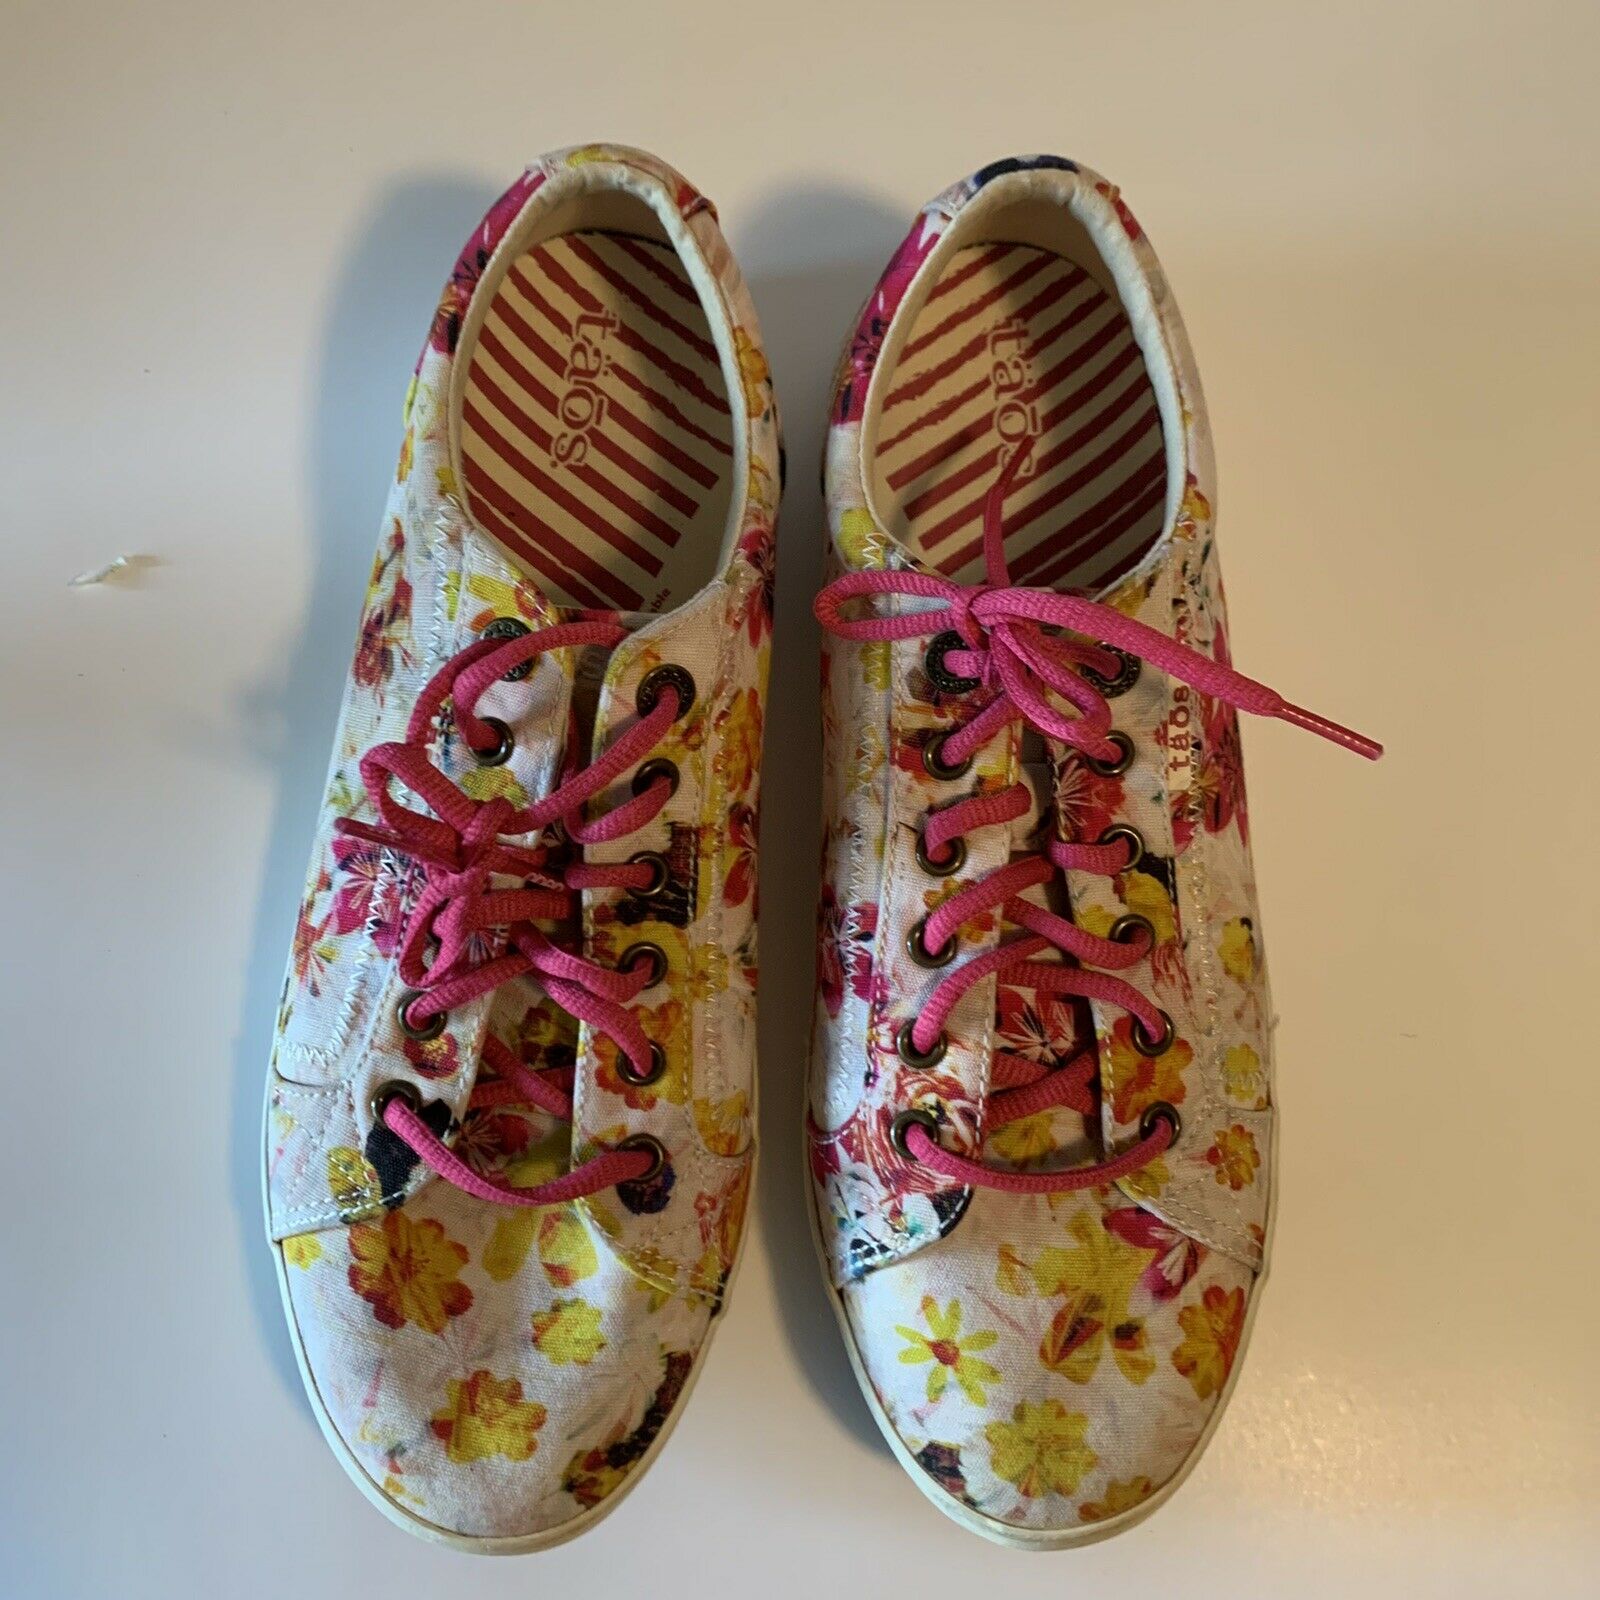 Taos Women Shoes Size 11, Multicolored Flower Print With Laces #35-0248